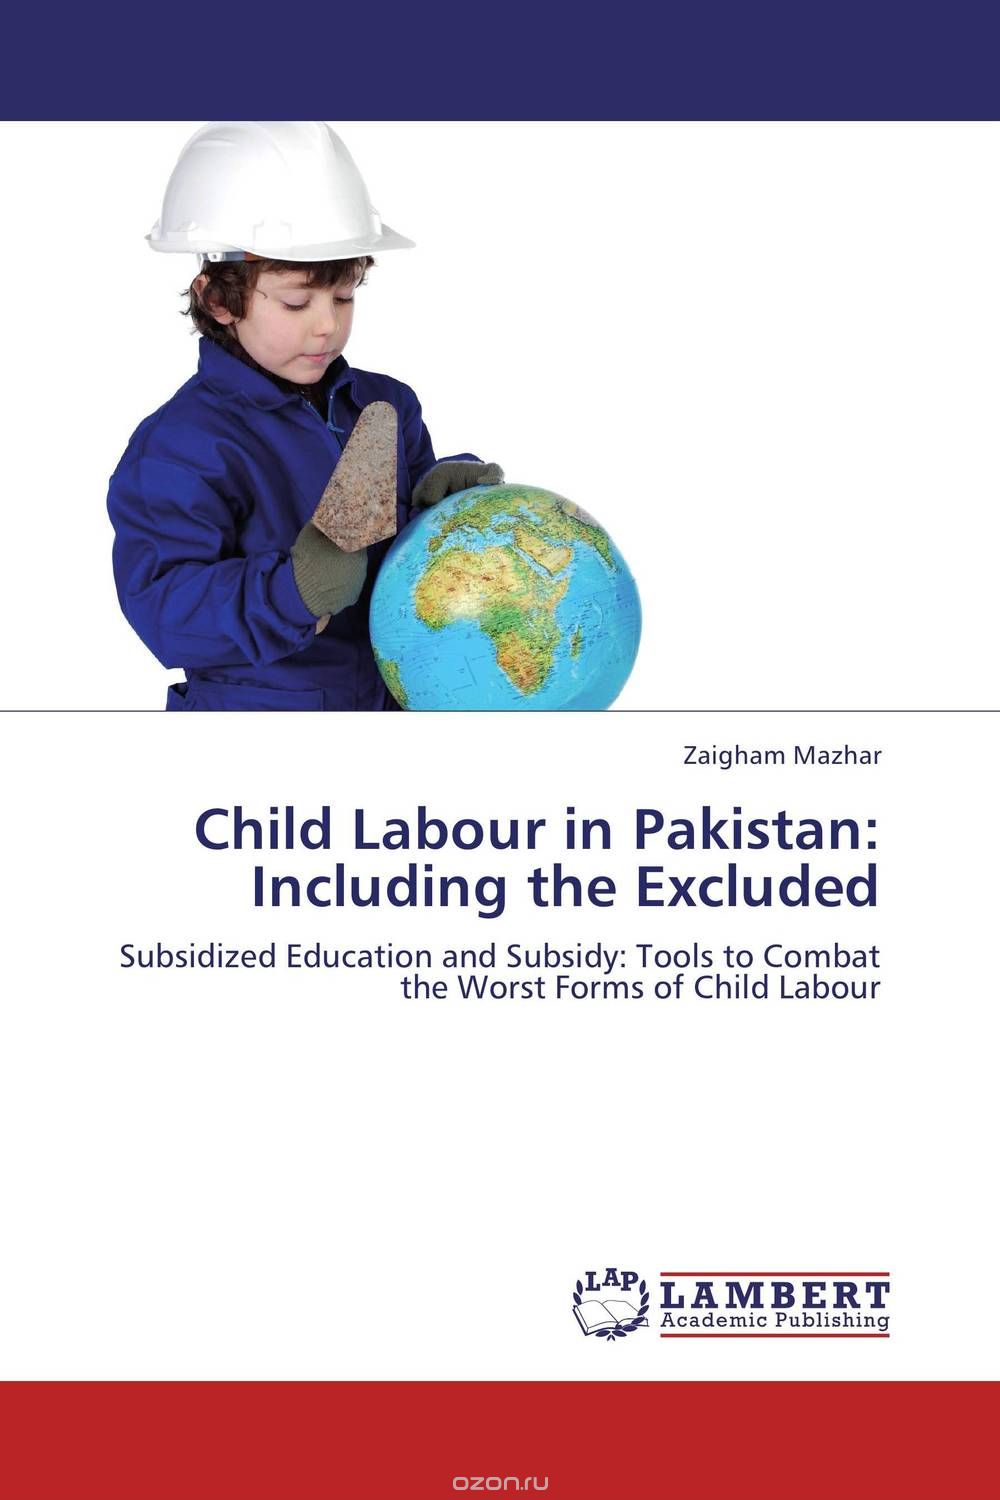 Скачать книгу "Child Labour in Pakistan: Including the Excluded"